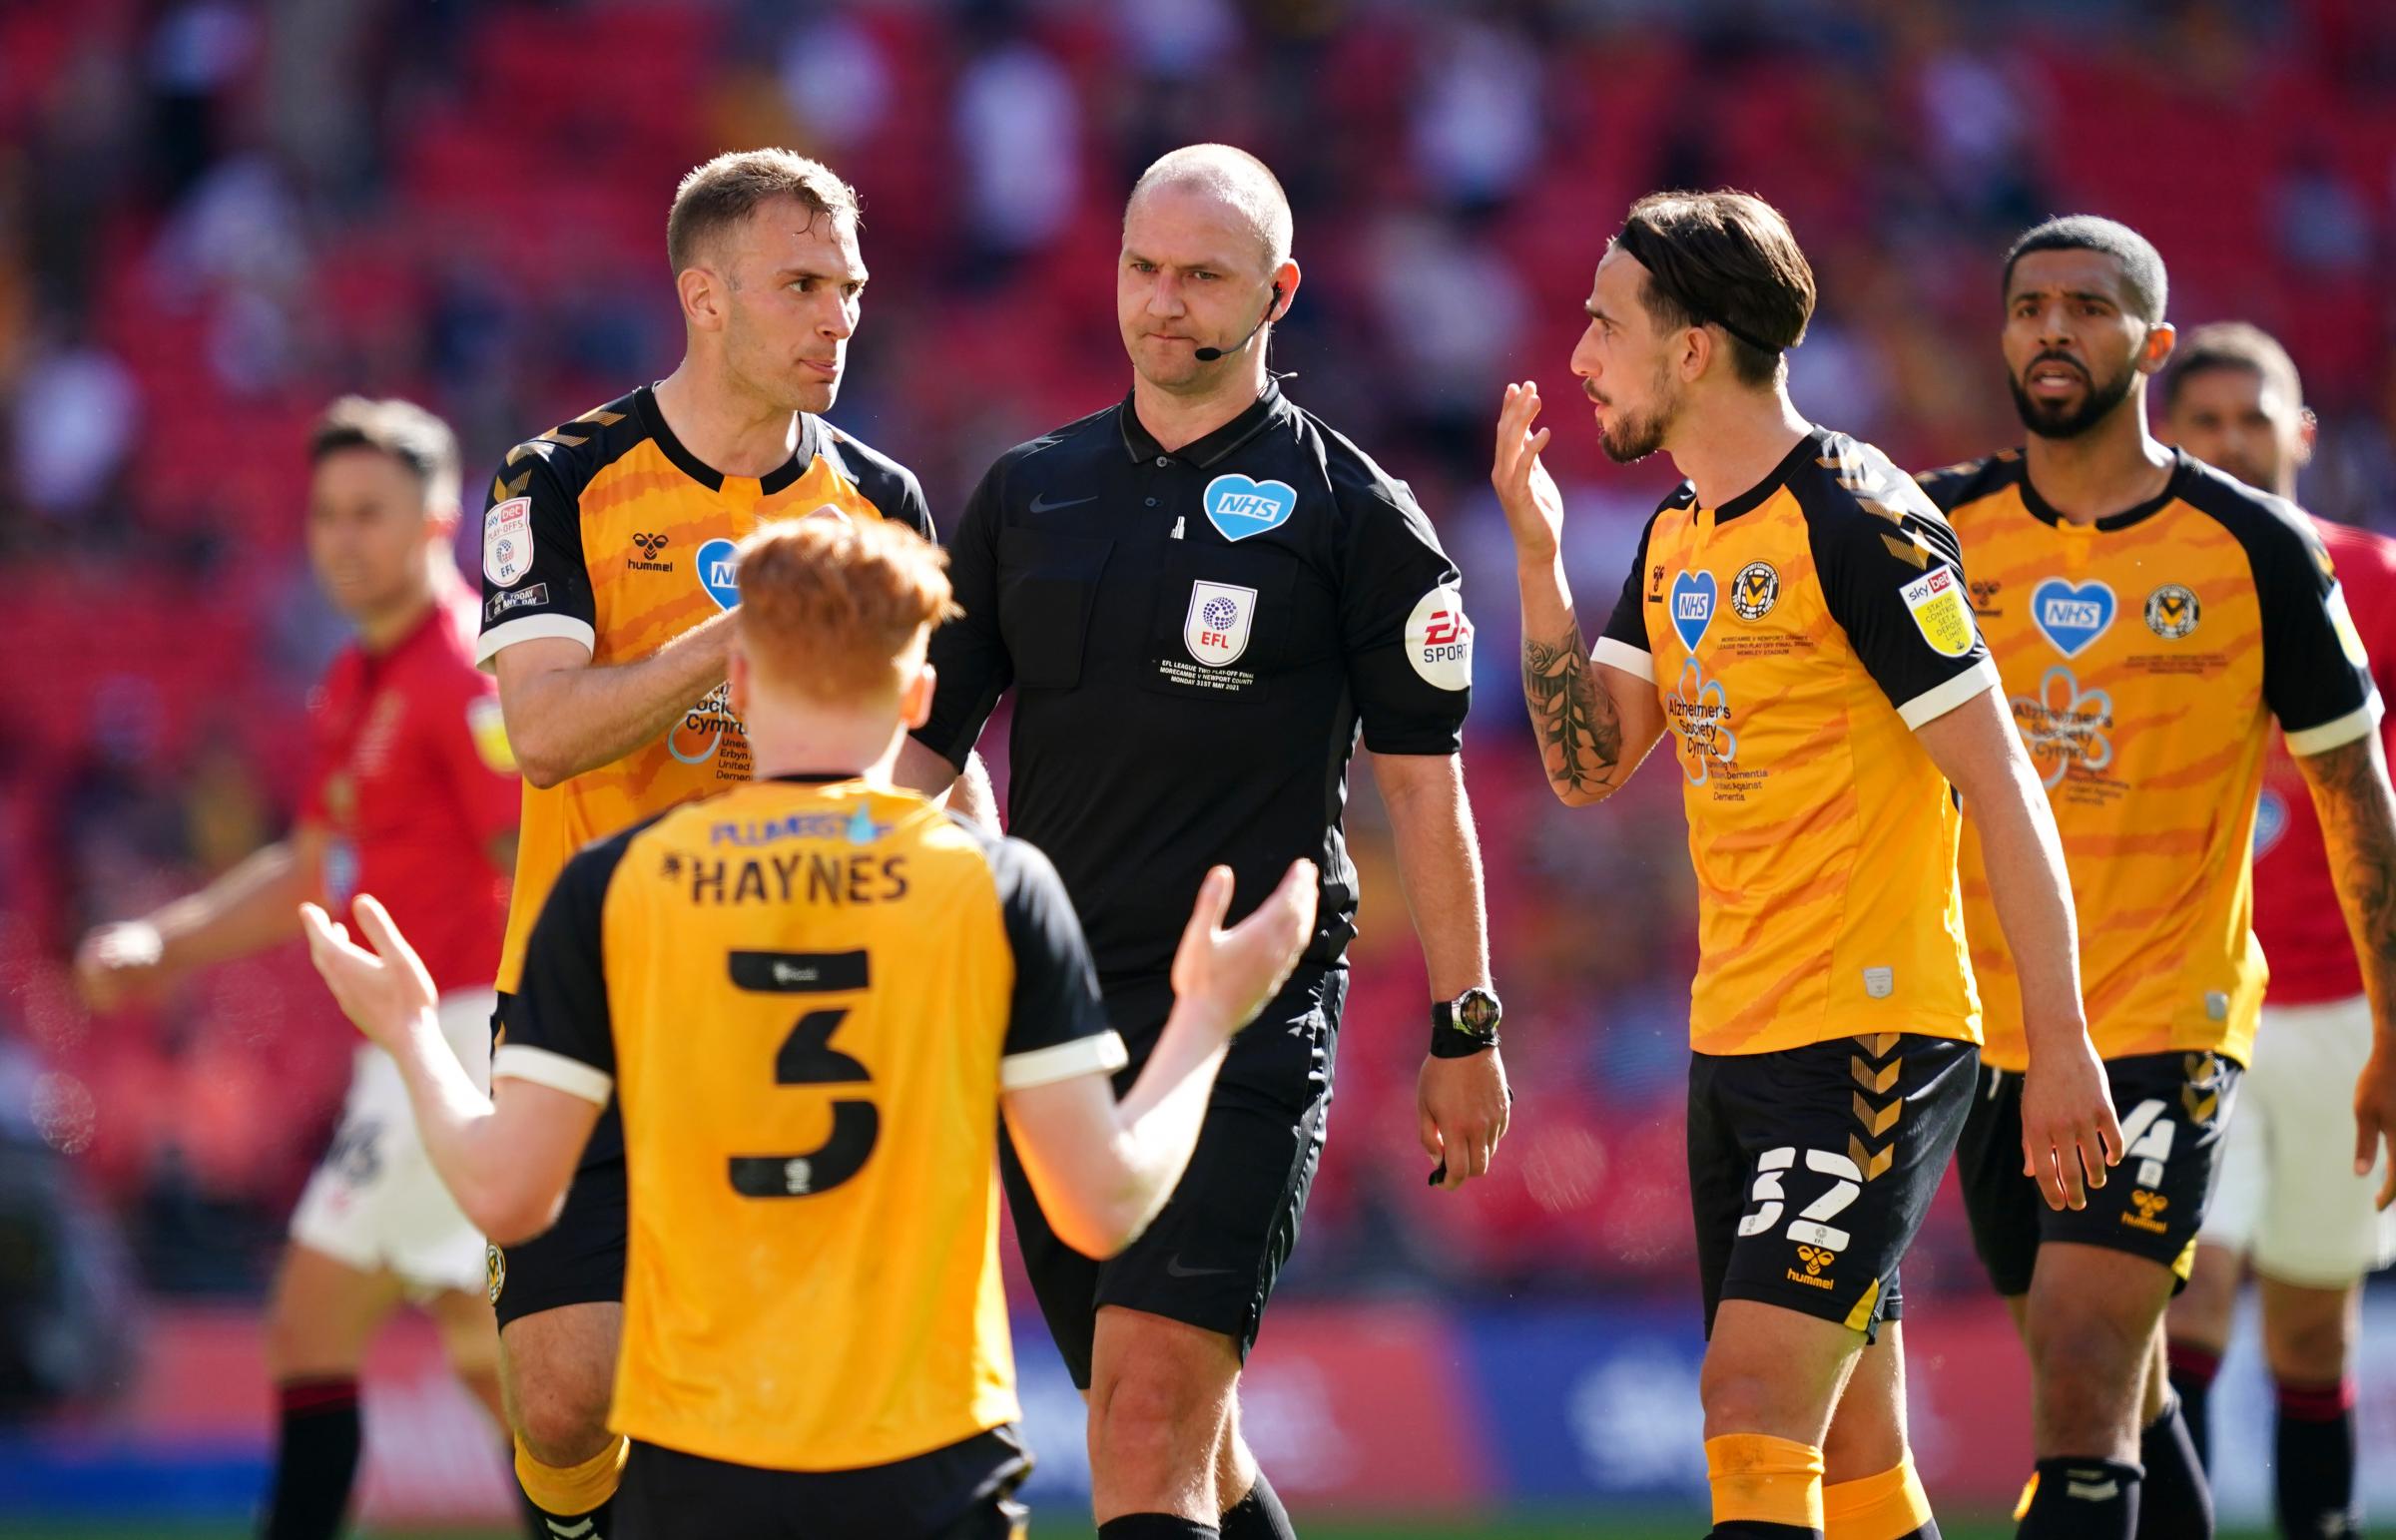 CONTROVERSIAL: Countys Ryan Haynes pleads innocence after referee Bobby Madley awards a penalty to Morecambe